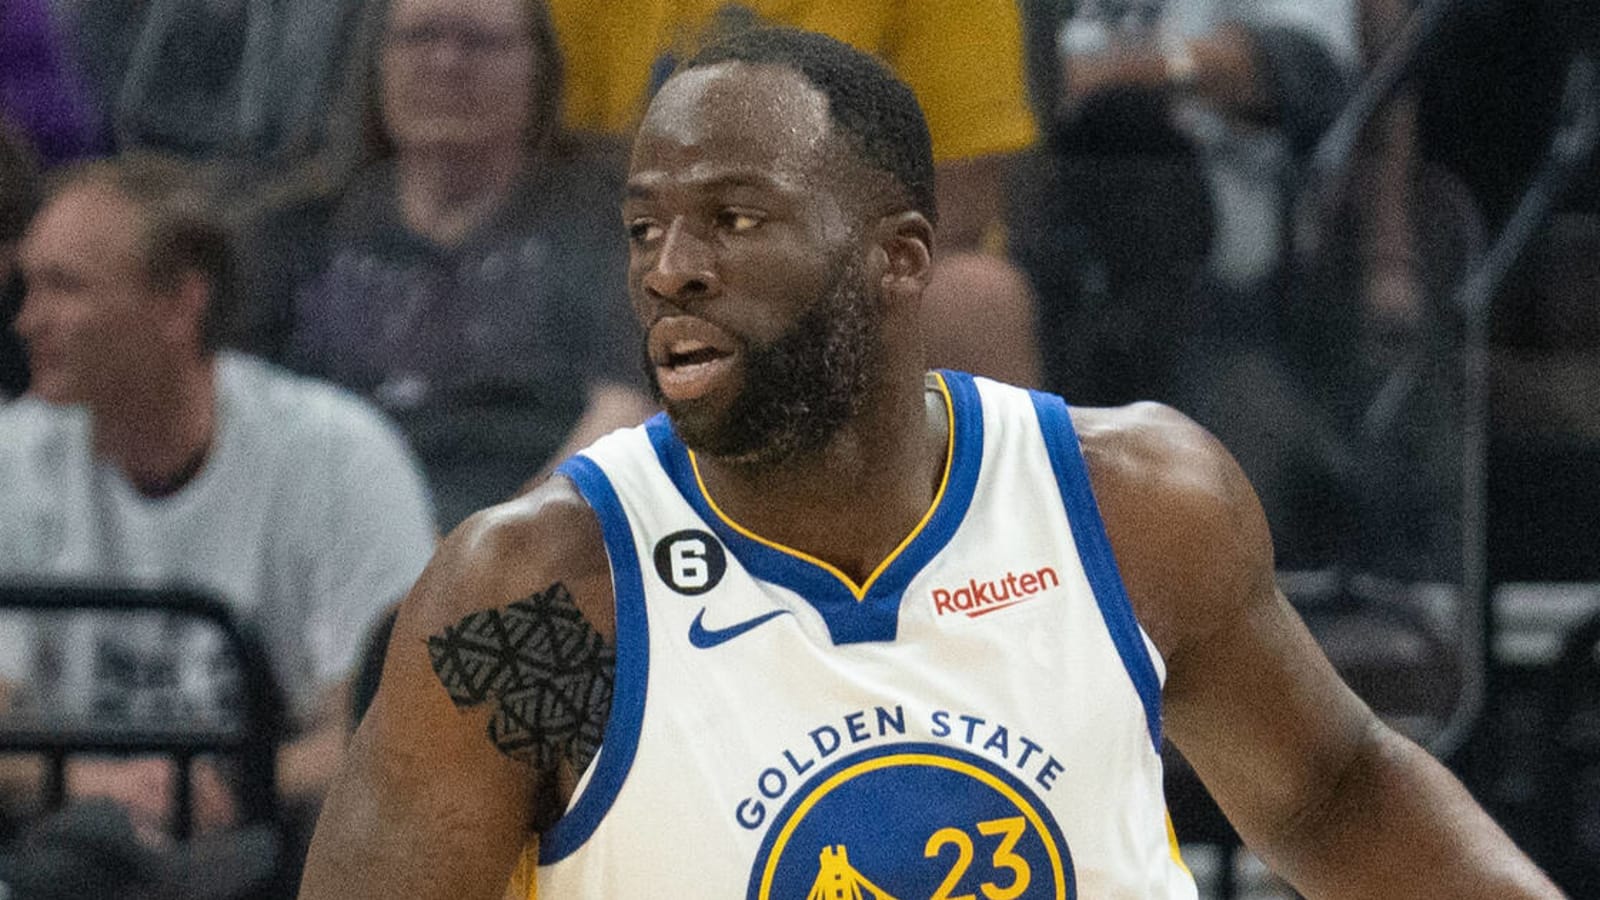 Draymond Green to re-sign with Warriors on multiyear deal